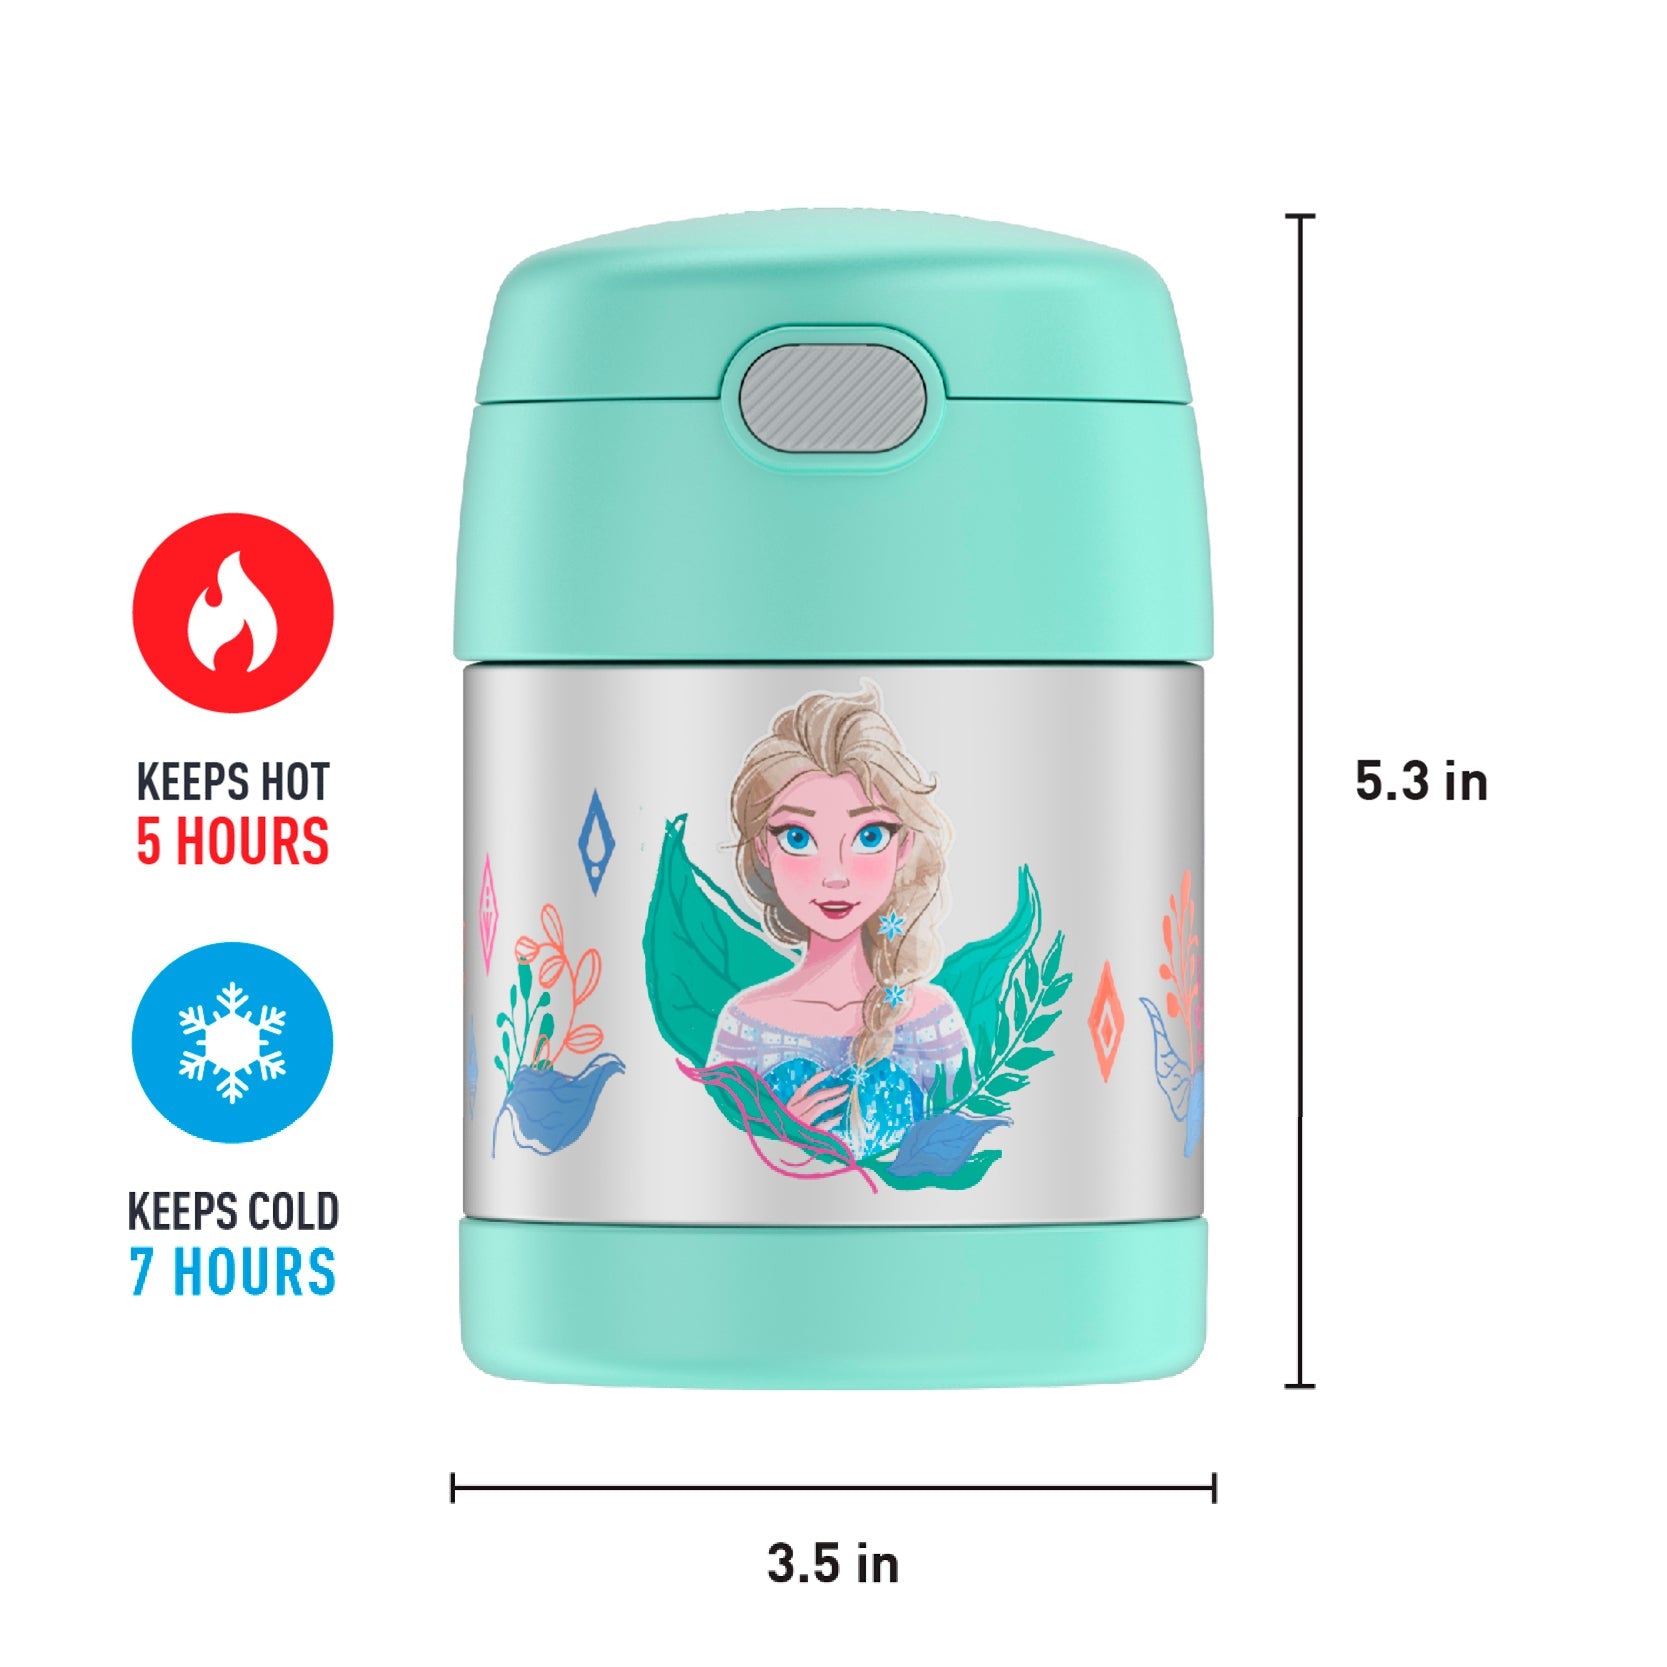 https://cdn.shopify.com/s/files/1/0523/9145/files/thermos-10oz-funtainer-food-jar-with-spoon-frozen-2-mint-thermal-food-jar-thermos-cute-kid-stuff-1_2000x.jpg?v=1682542558